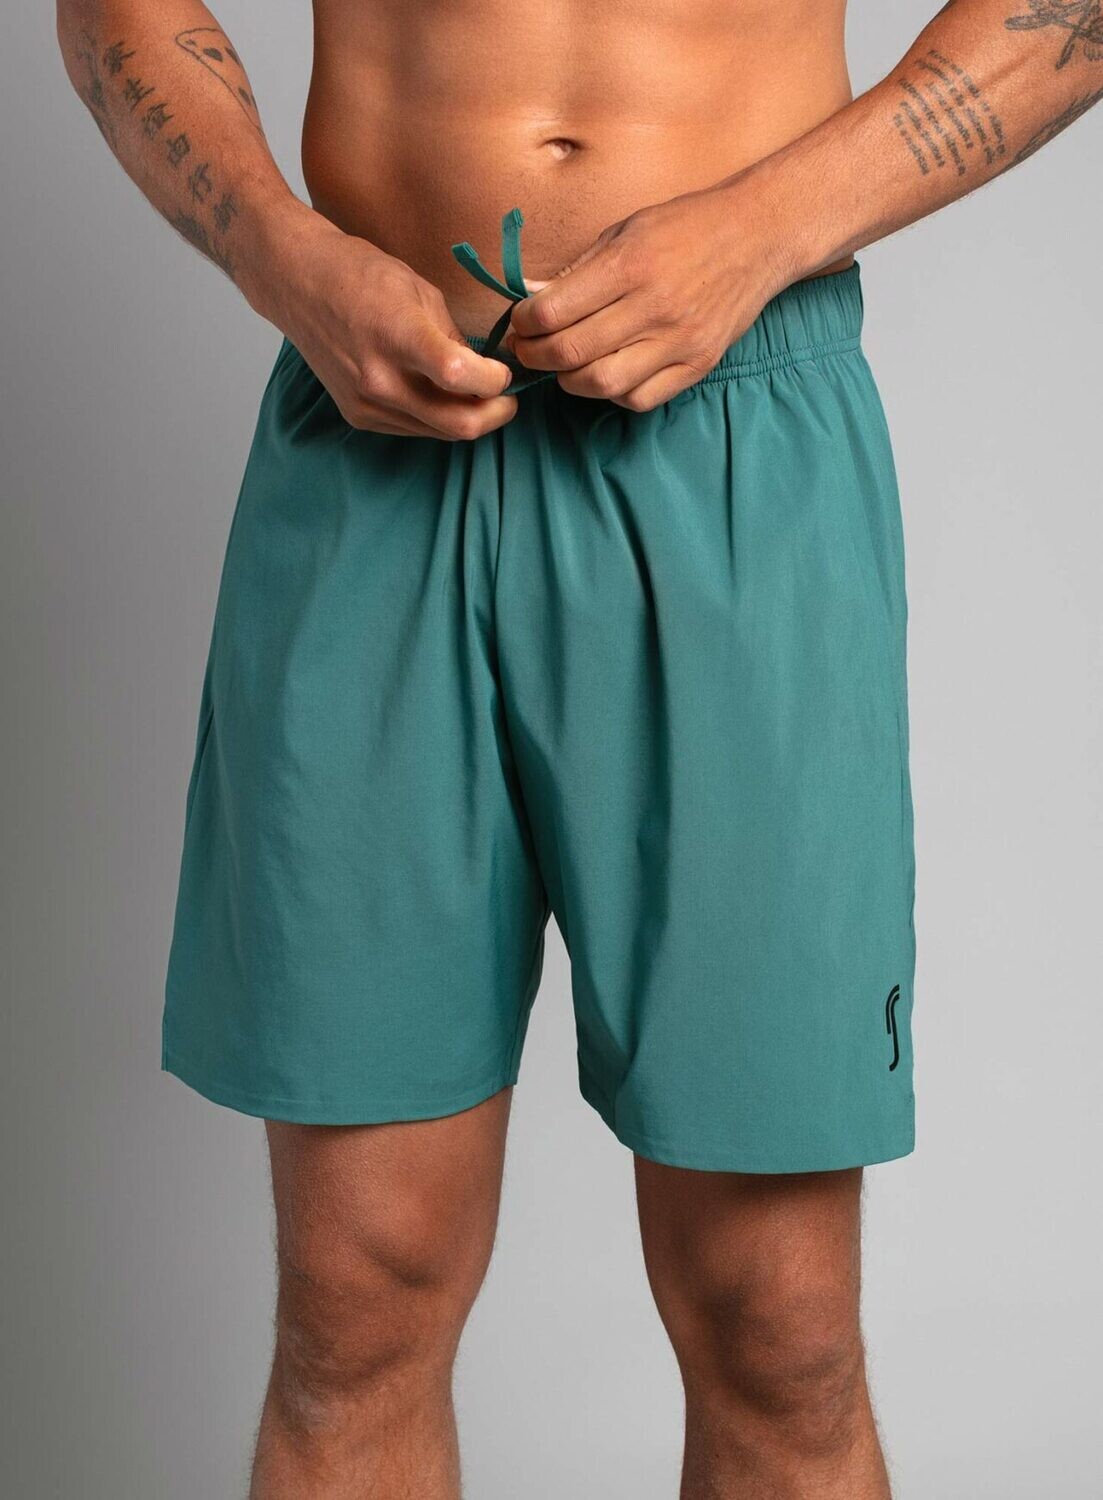 RS Men's Performance shorts - Teal